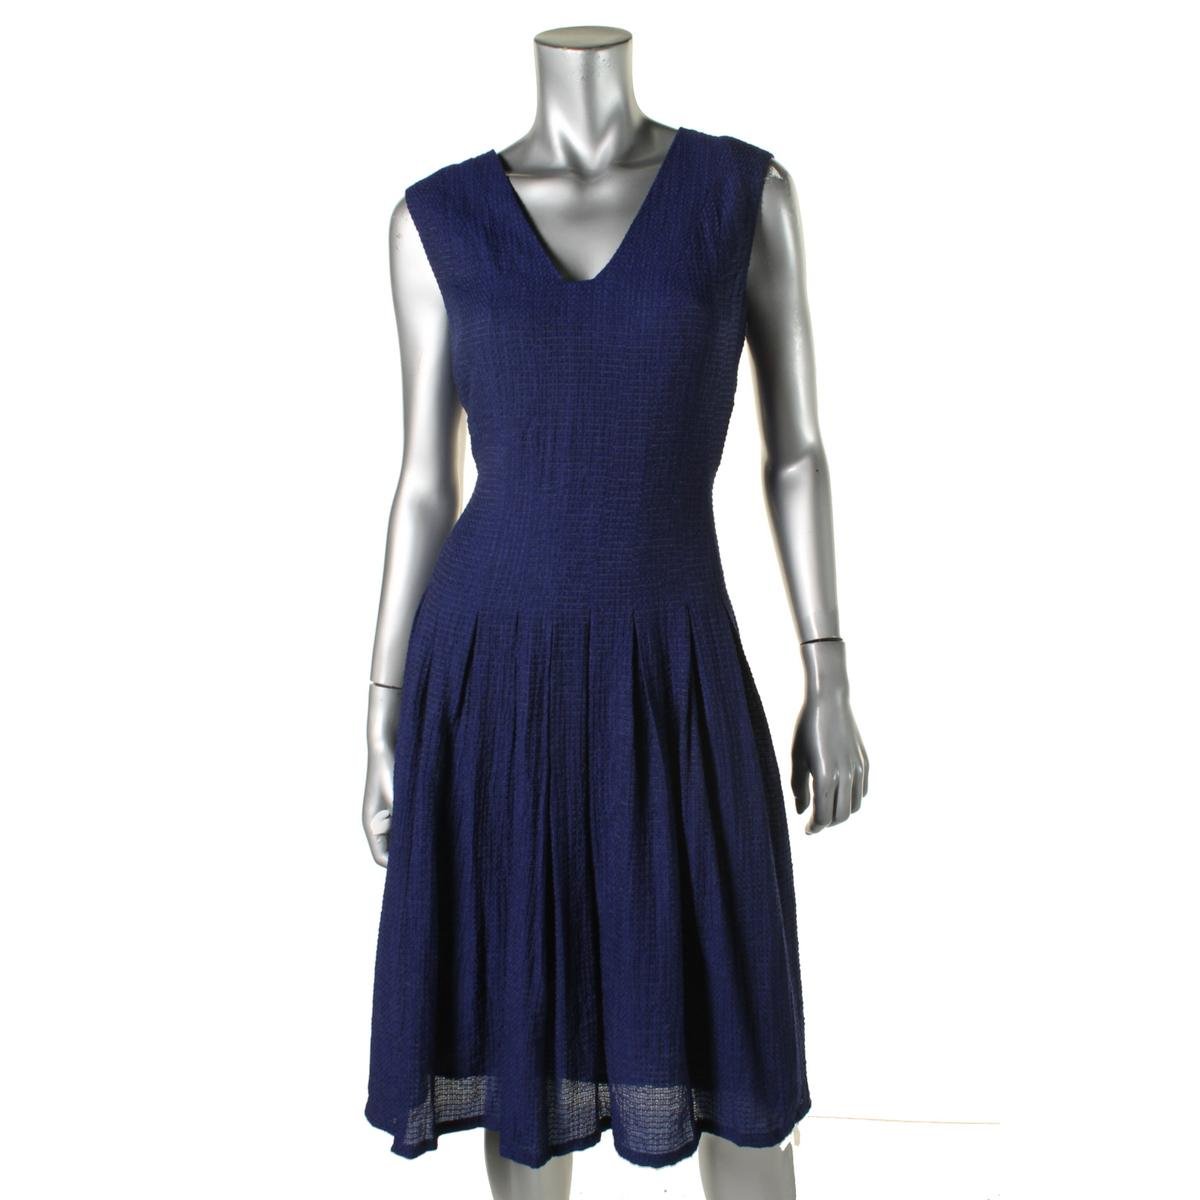 Anne Klein 0237 Womens Blue Pleated Knee-Length Party Cocktail Dress 2 BHFO